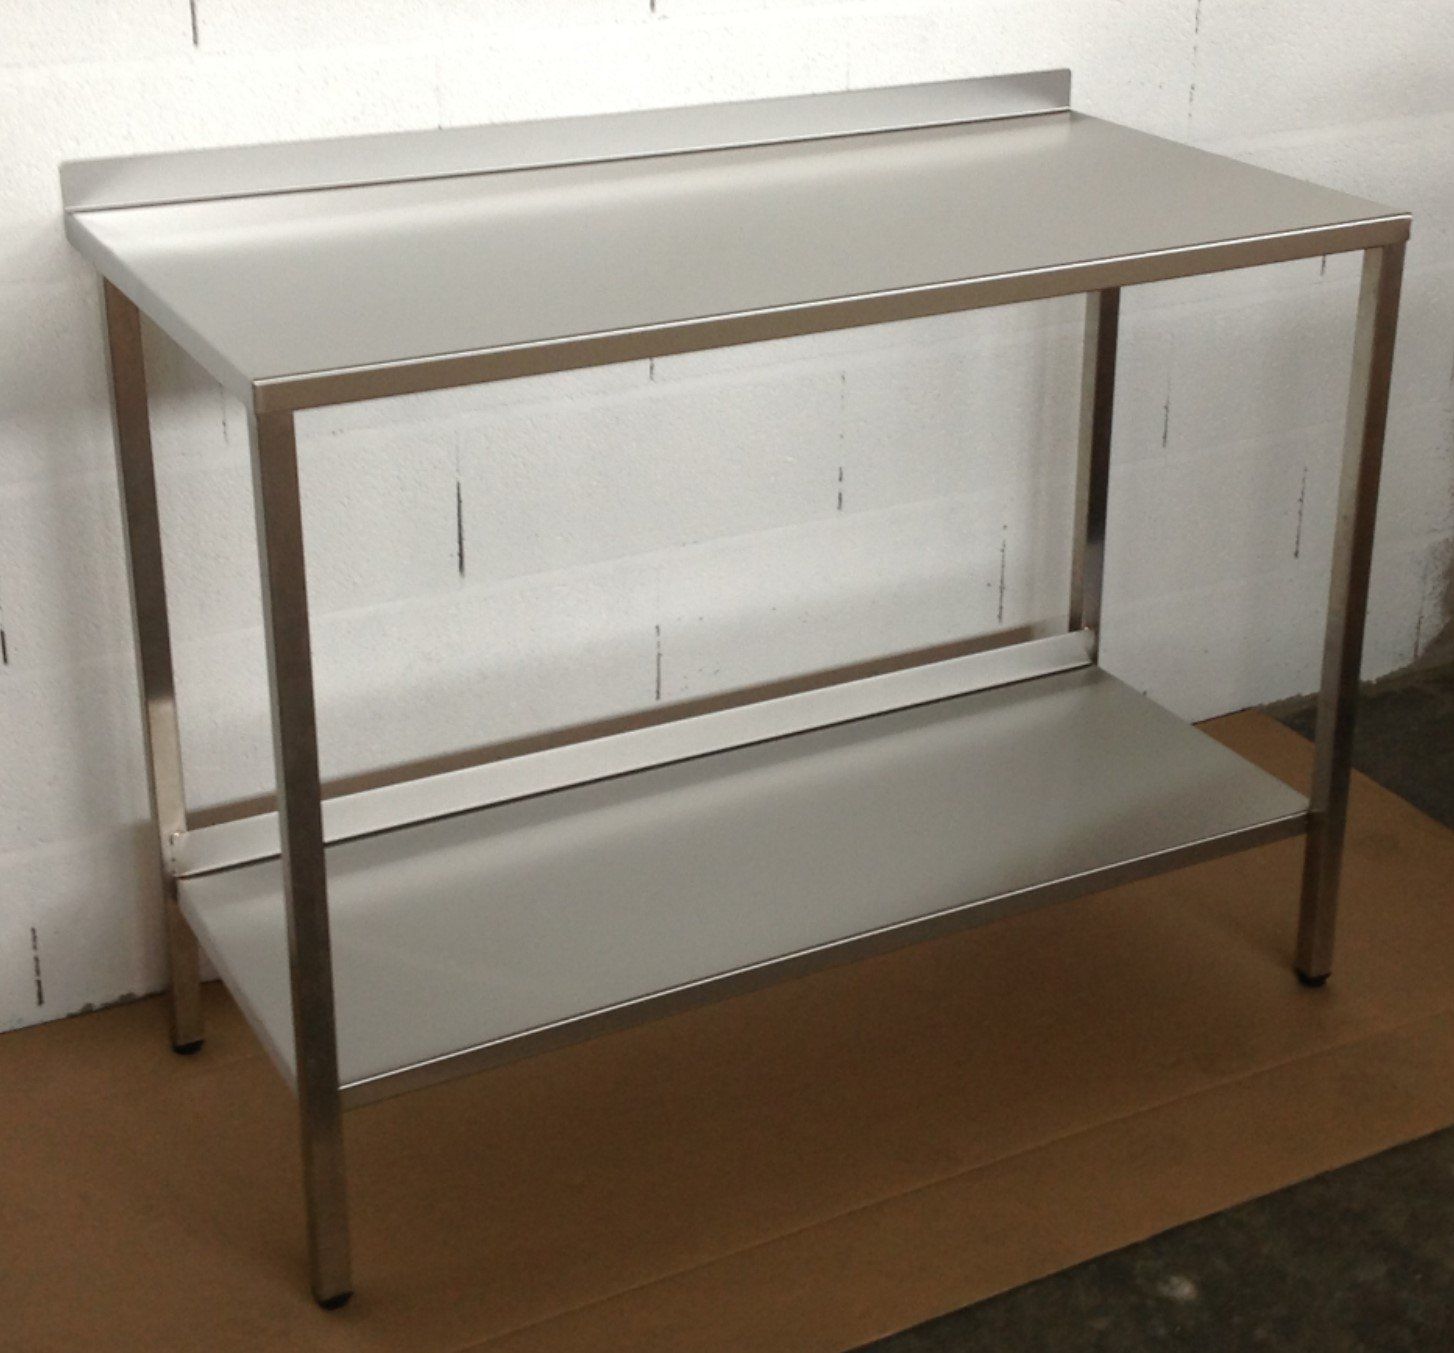 bespoke stainless steel catering tables, bespoke stainless steel kitchen tables, bespoke stainless steel wall  tables